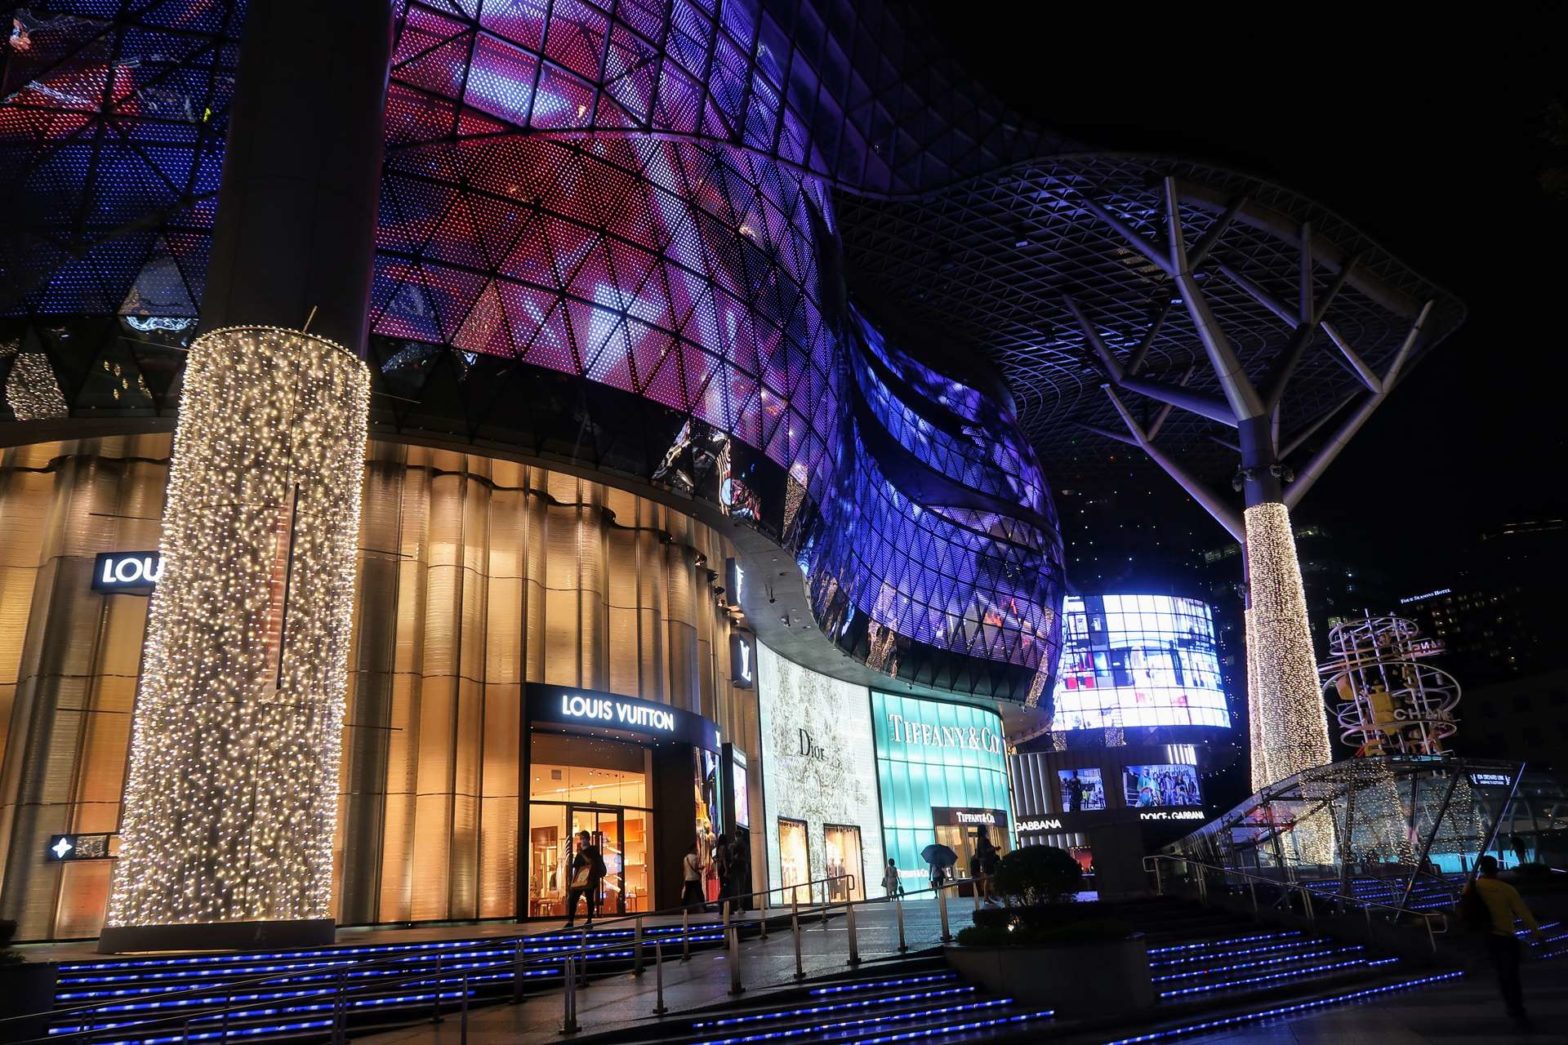 ION Orchard Mall on Orchard Road in Singapore